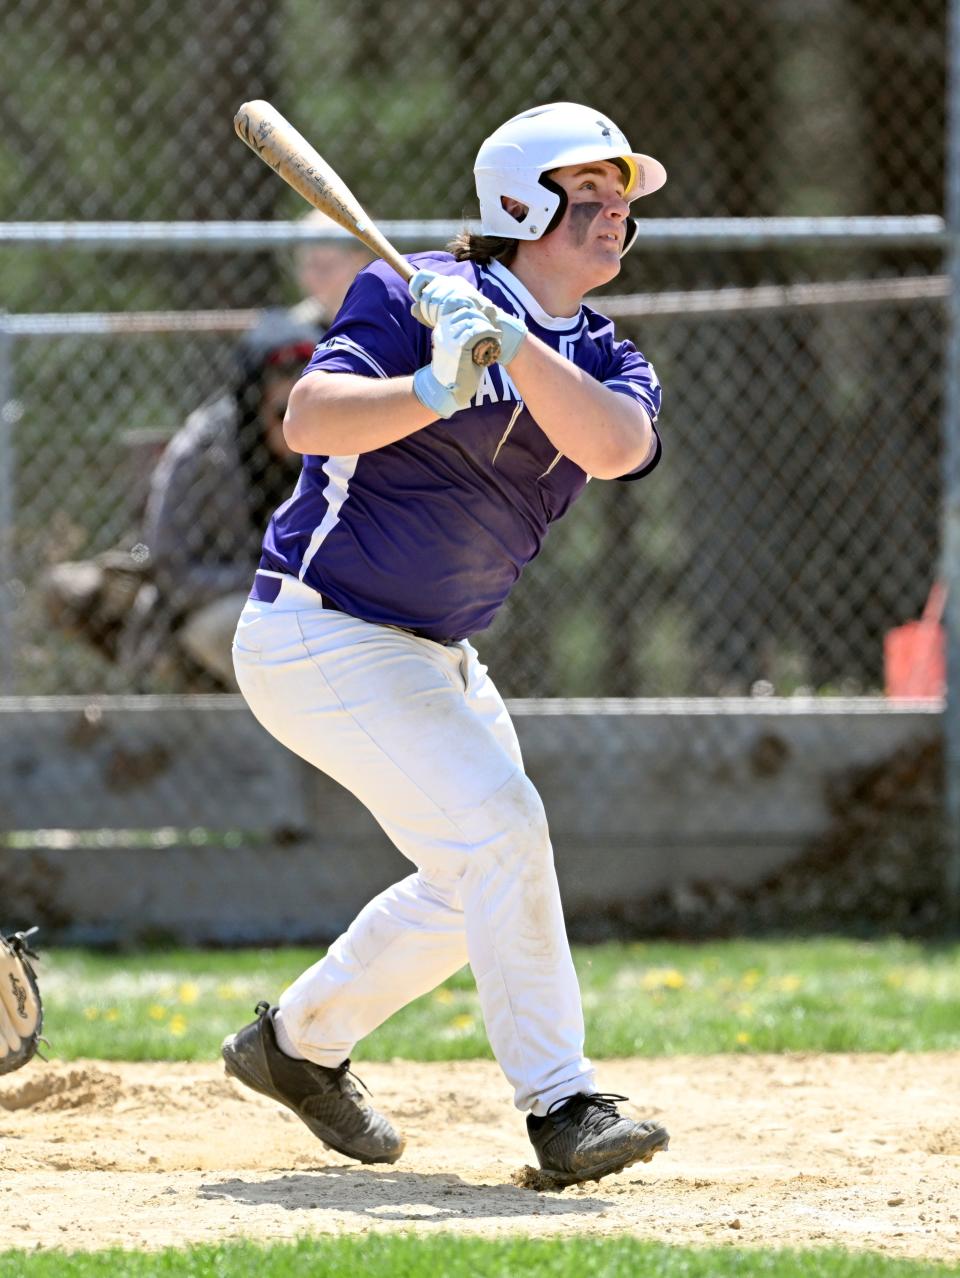 Luca Finton of Bourne drives the ball deep in center for a triple against Wareham on April 21, 2023.